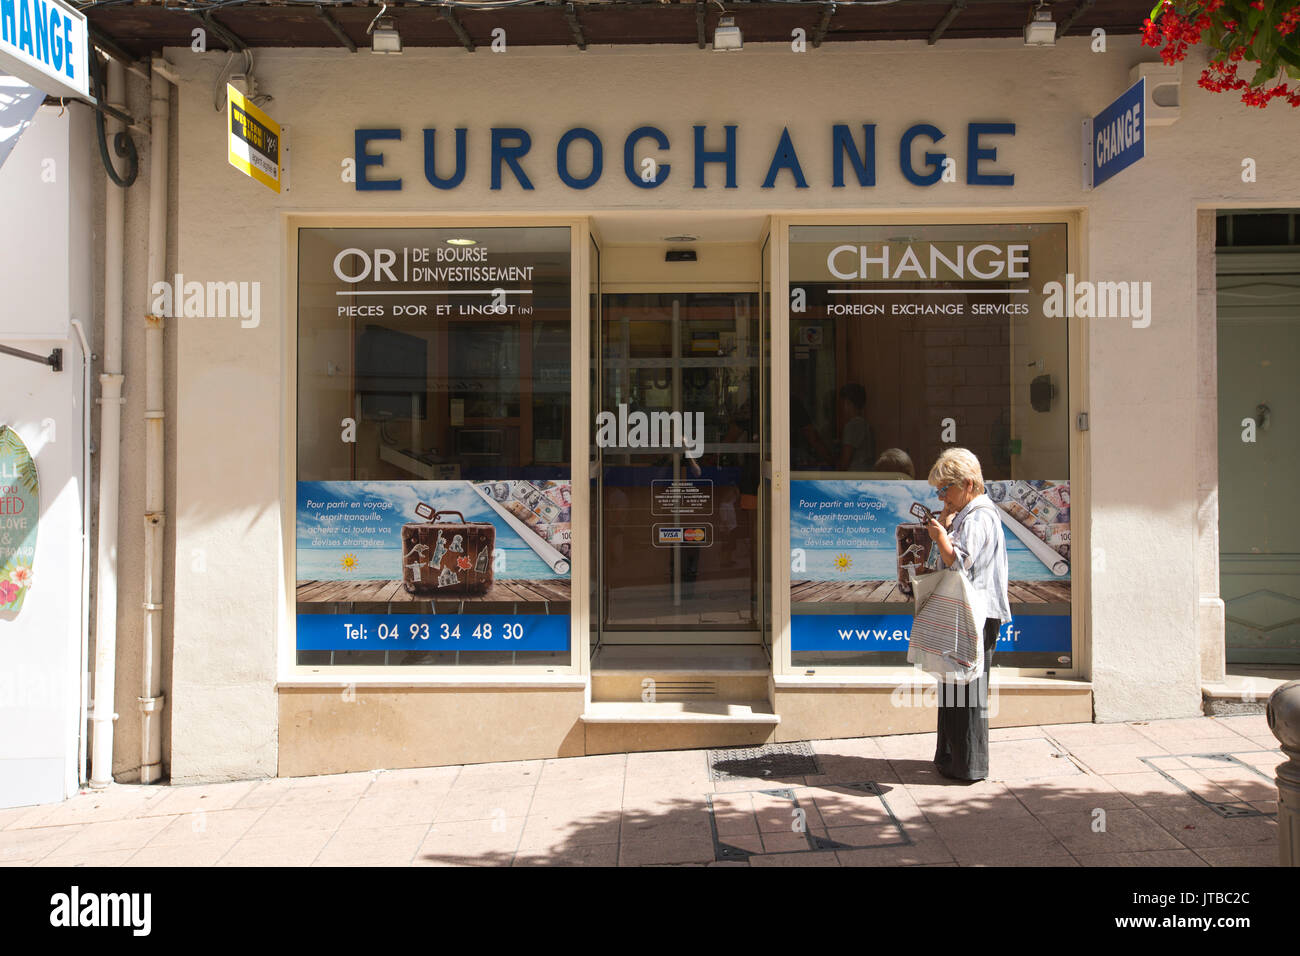 EUROCHANGE foreign exchange branch in Antibes, Mediterranean resort town located between Cannes and Nice on French Riviera, Provence-Alpes-Cote d'Azur Stock Photo